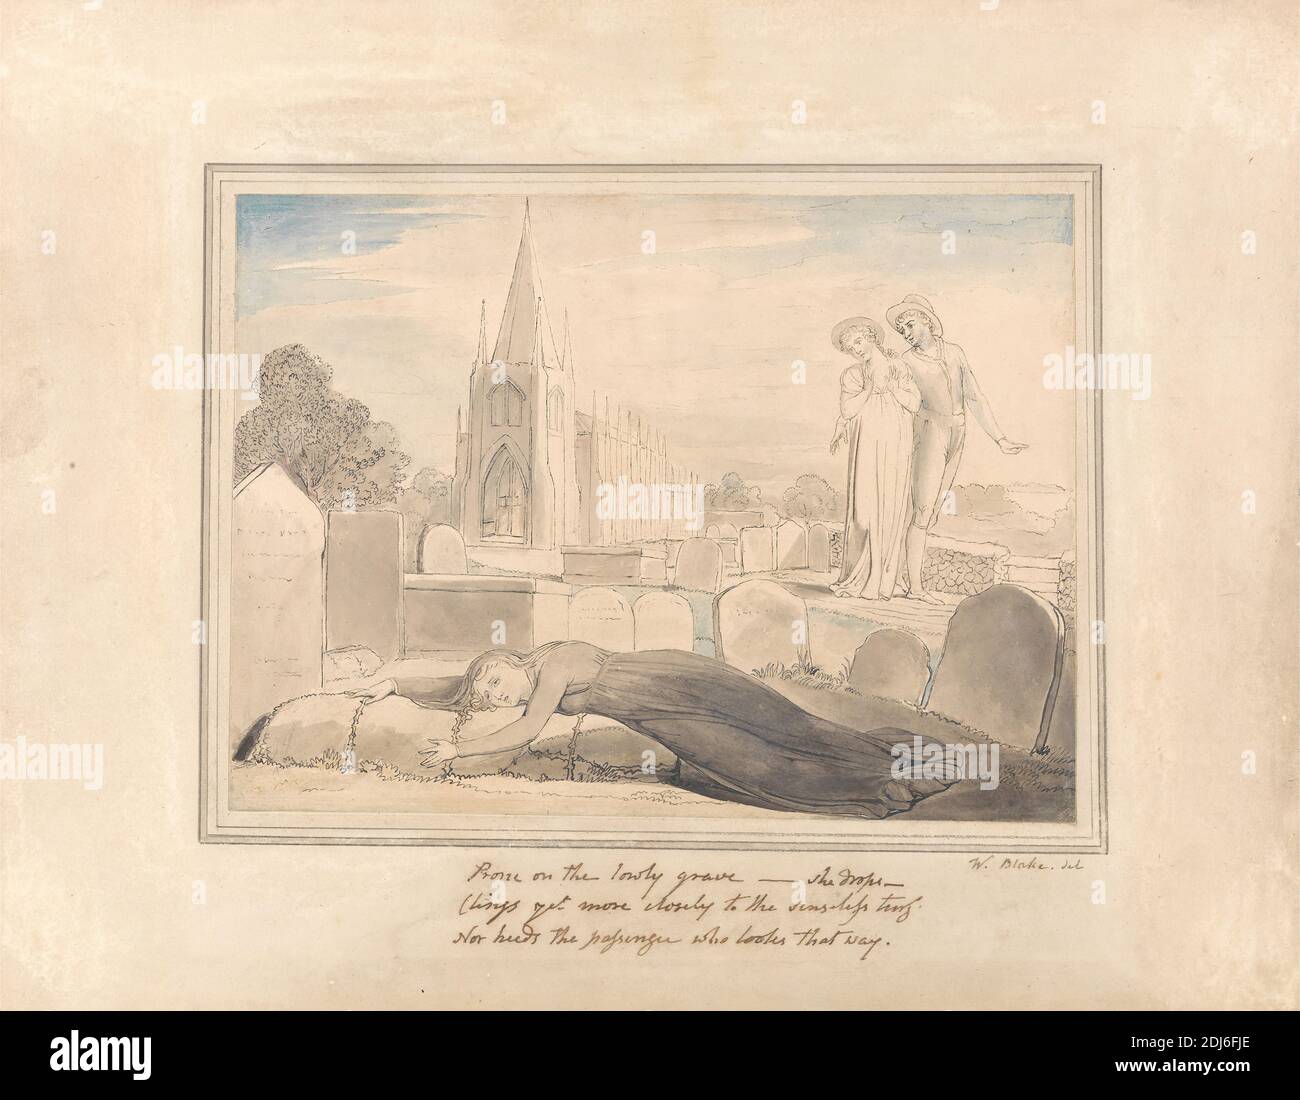 The Widow Embracing Her Husband's Grave, William Blake, 1757–1827, British, 1805 to 1808, Pen and gray ink with graphite and watercolor on medium, moderately textured, cream wove paper, Sheet: 6 x 8 1/8 inches (15.2 x 20.6 cm) and Mount: 10 3/8 x 13 inches (26.4 x 33 cm), church, couple, genre subject, graves, graveyard, husband, man, mourning, spire, tombstones, widow, women Stock Photo